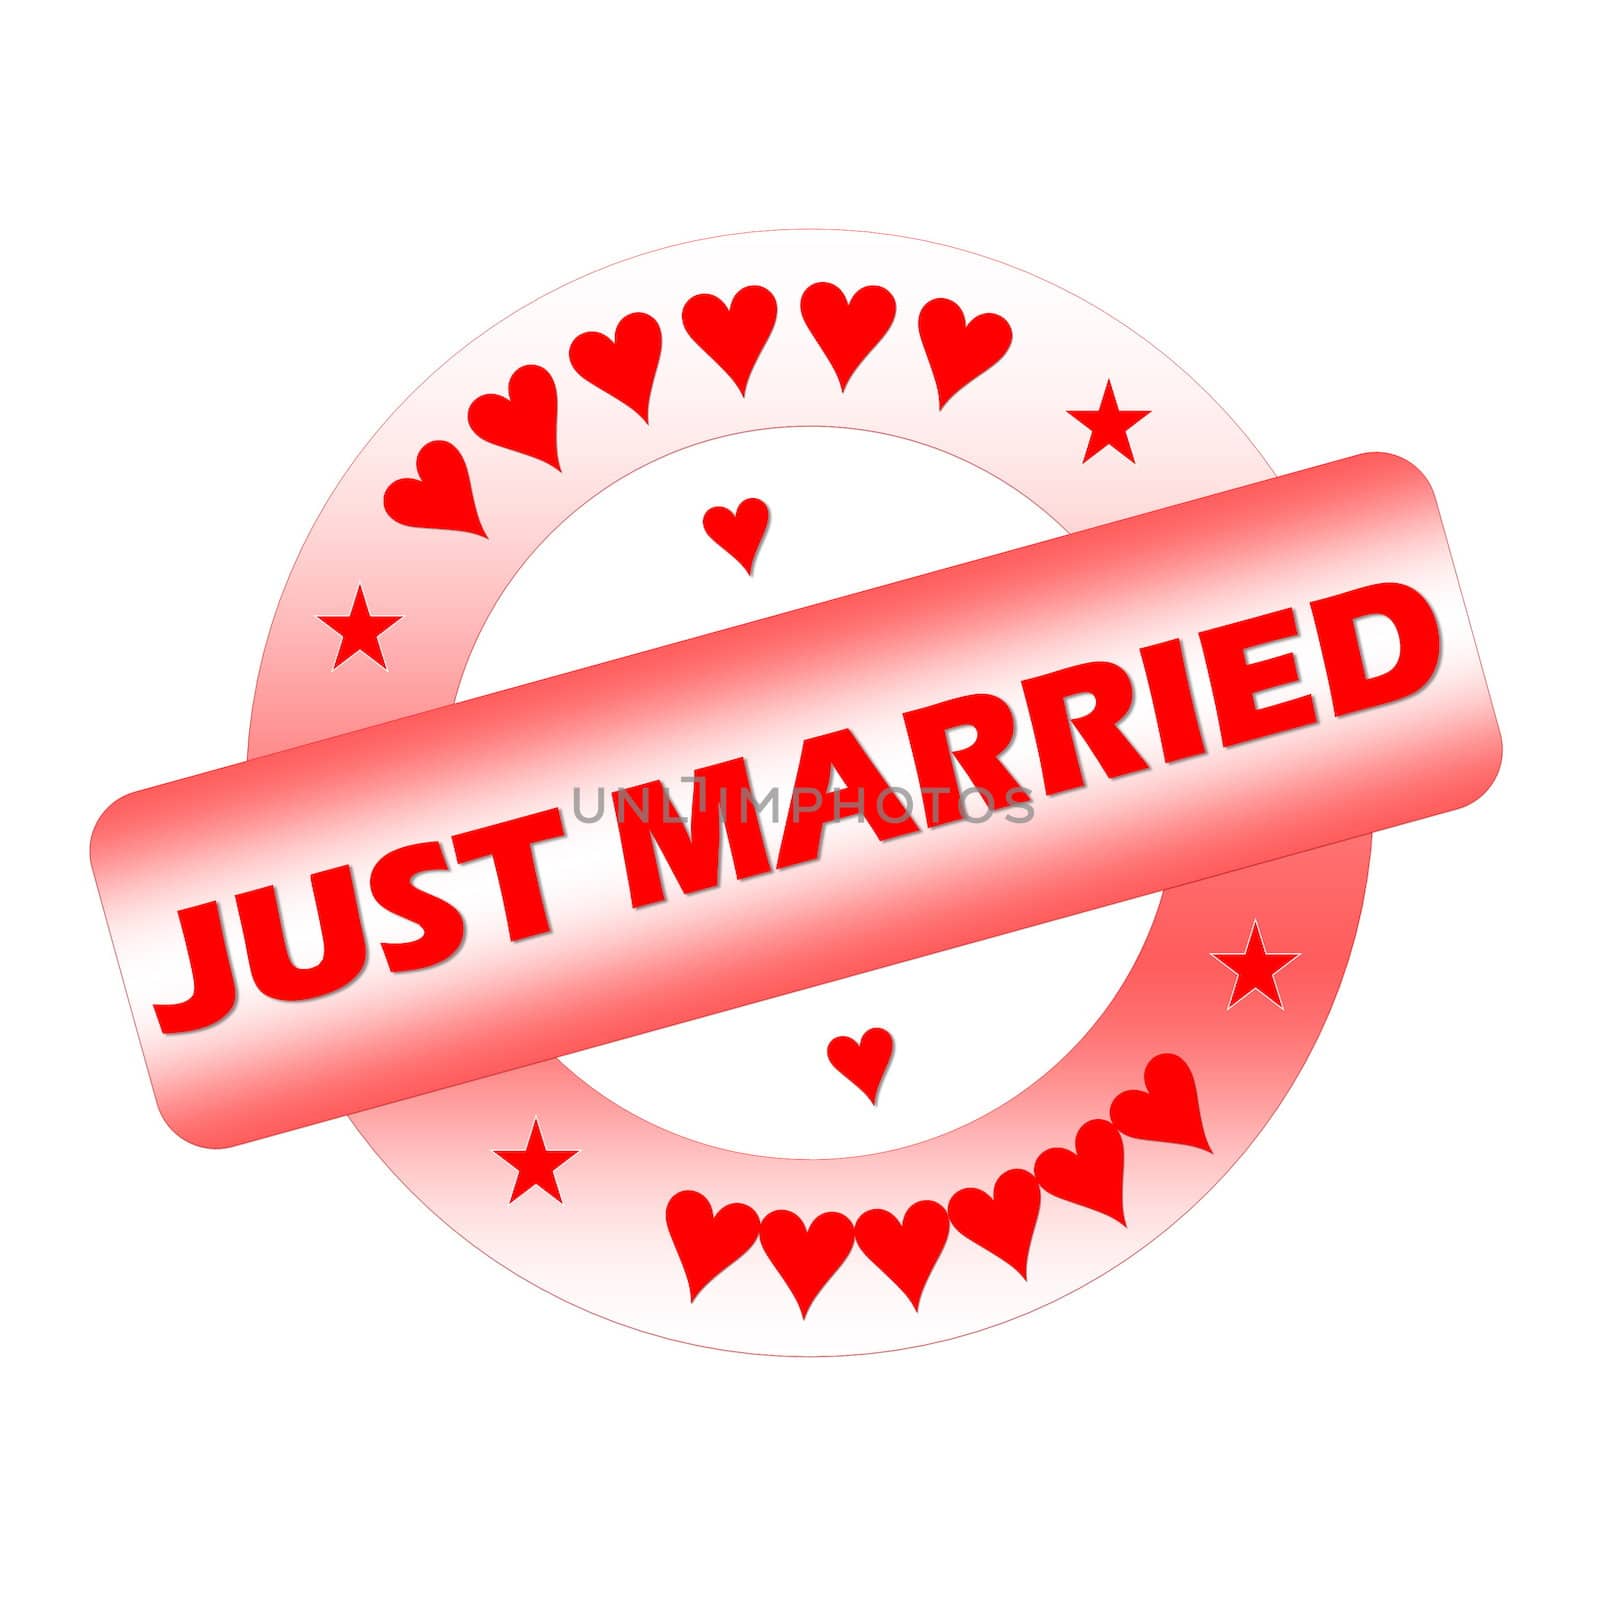 Just married stamp by Elenaphotos21